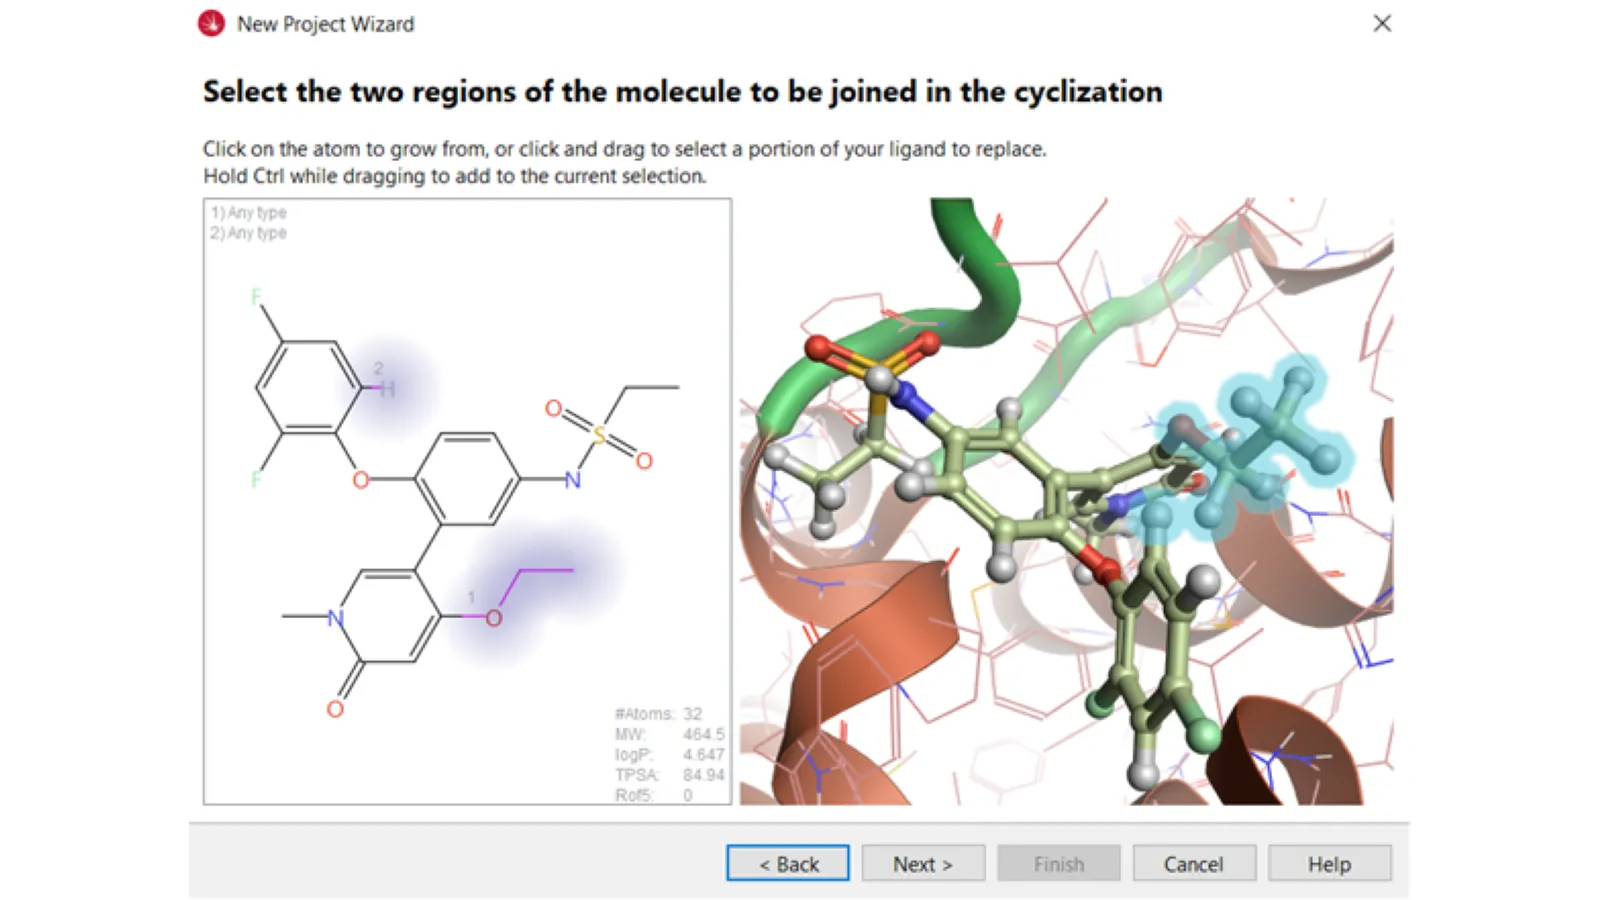 Selecting the two regions of the starter molecule to be joined in the cyclization experiment.